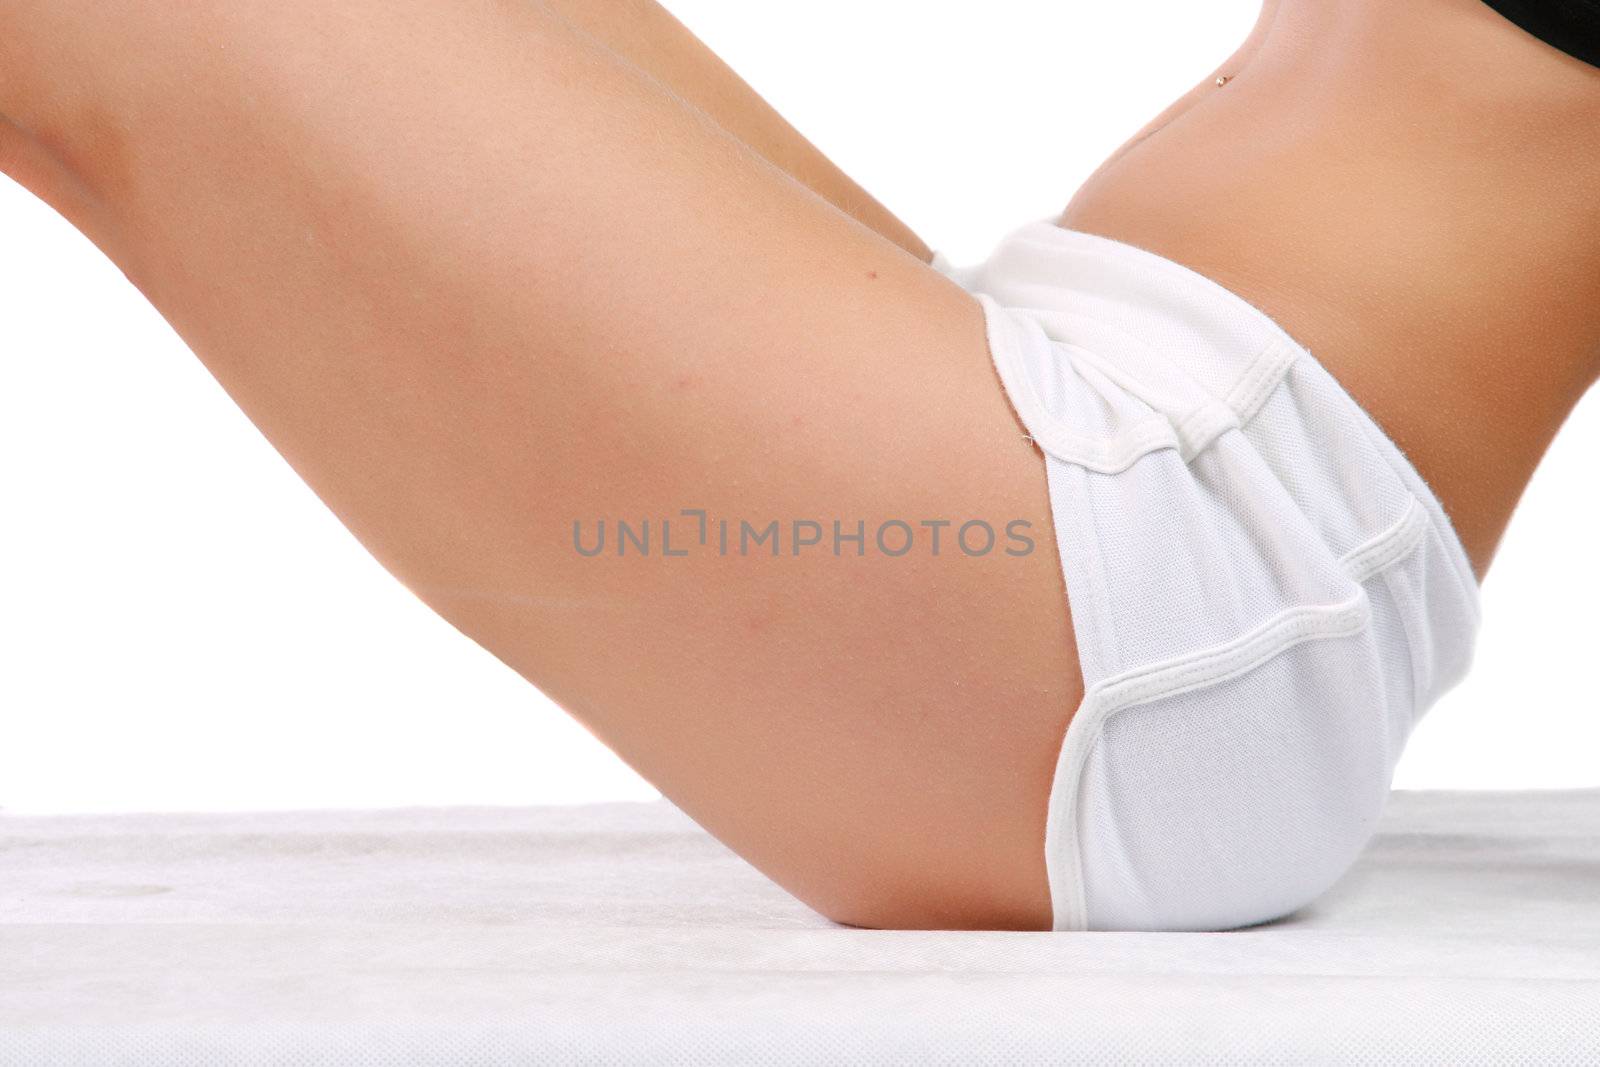 Healthy skin on legs and waists at the woman